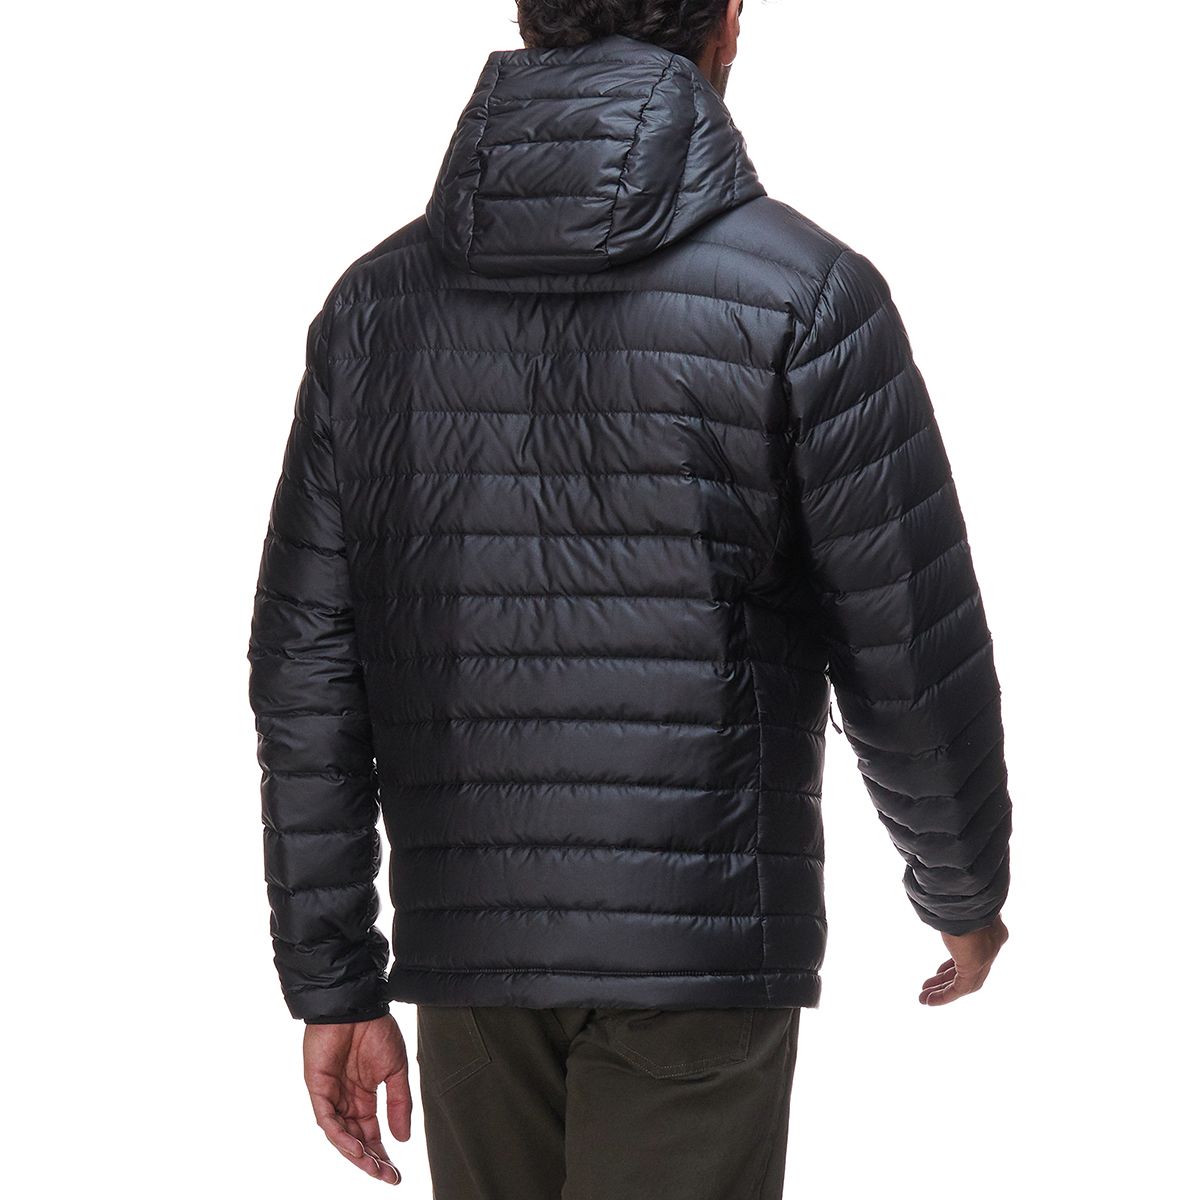 Patagonia Down Sweater Hooded Jacket - Men's | Backcountry.com